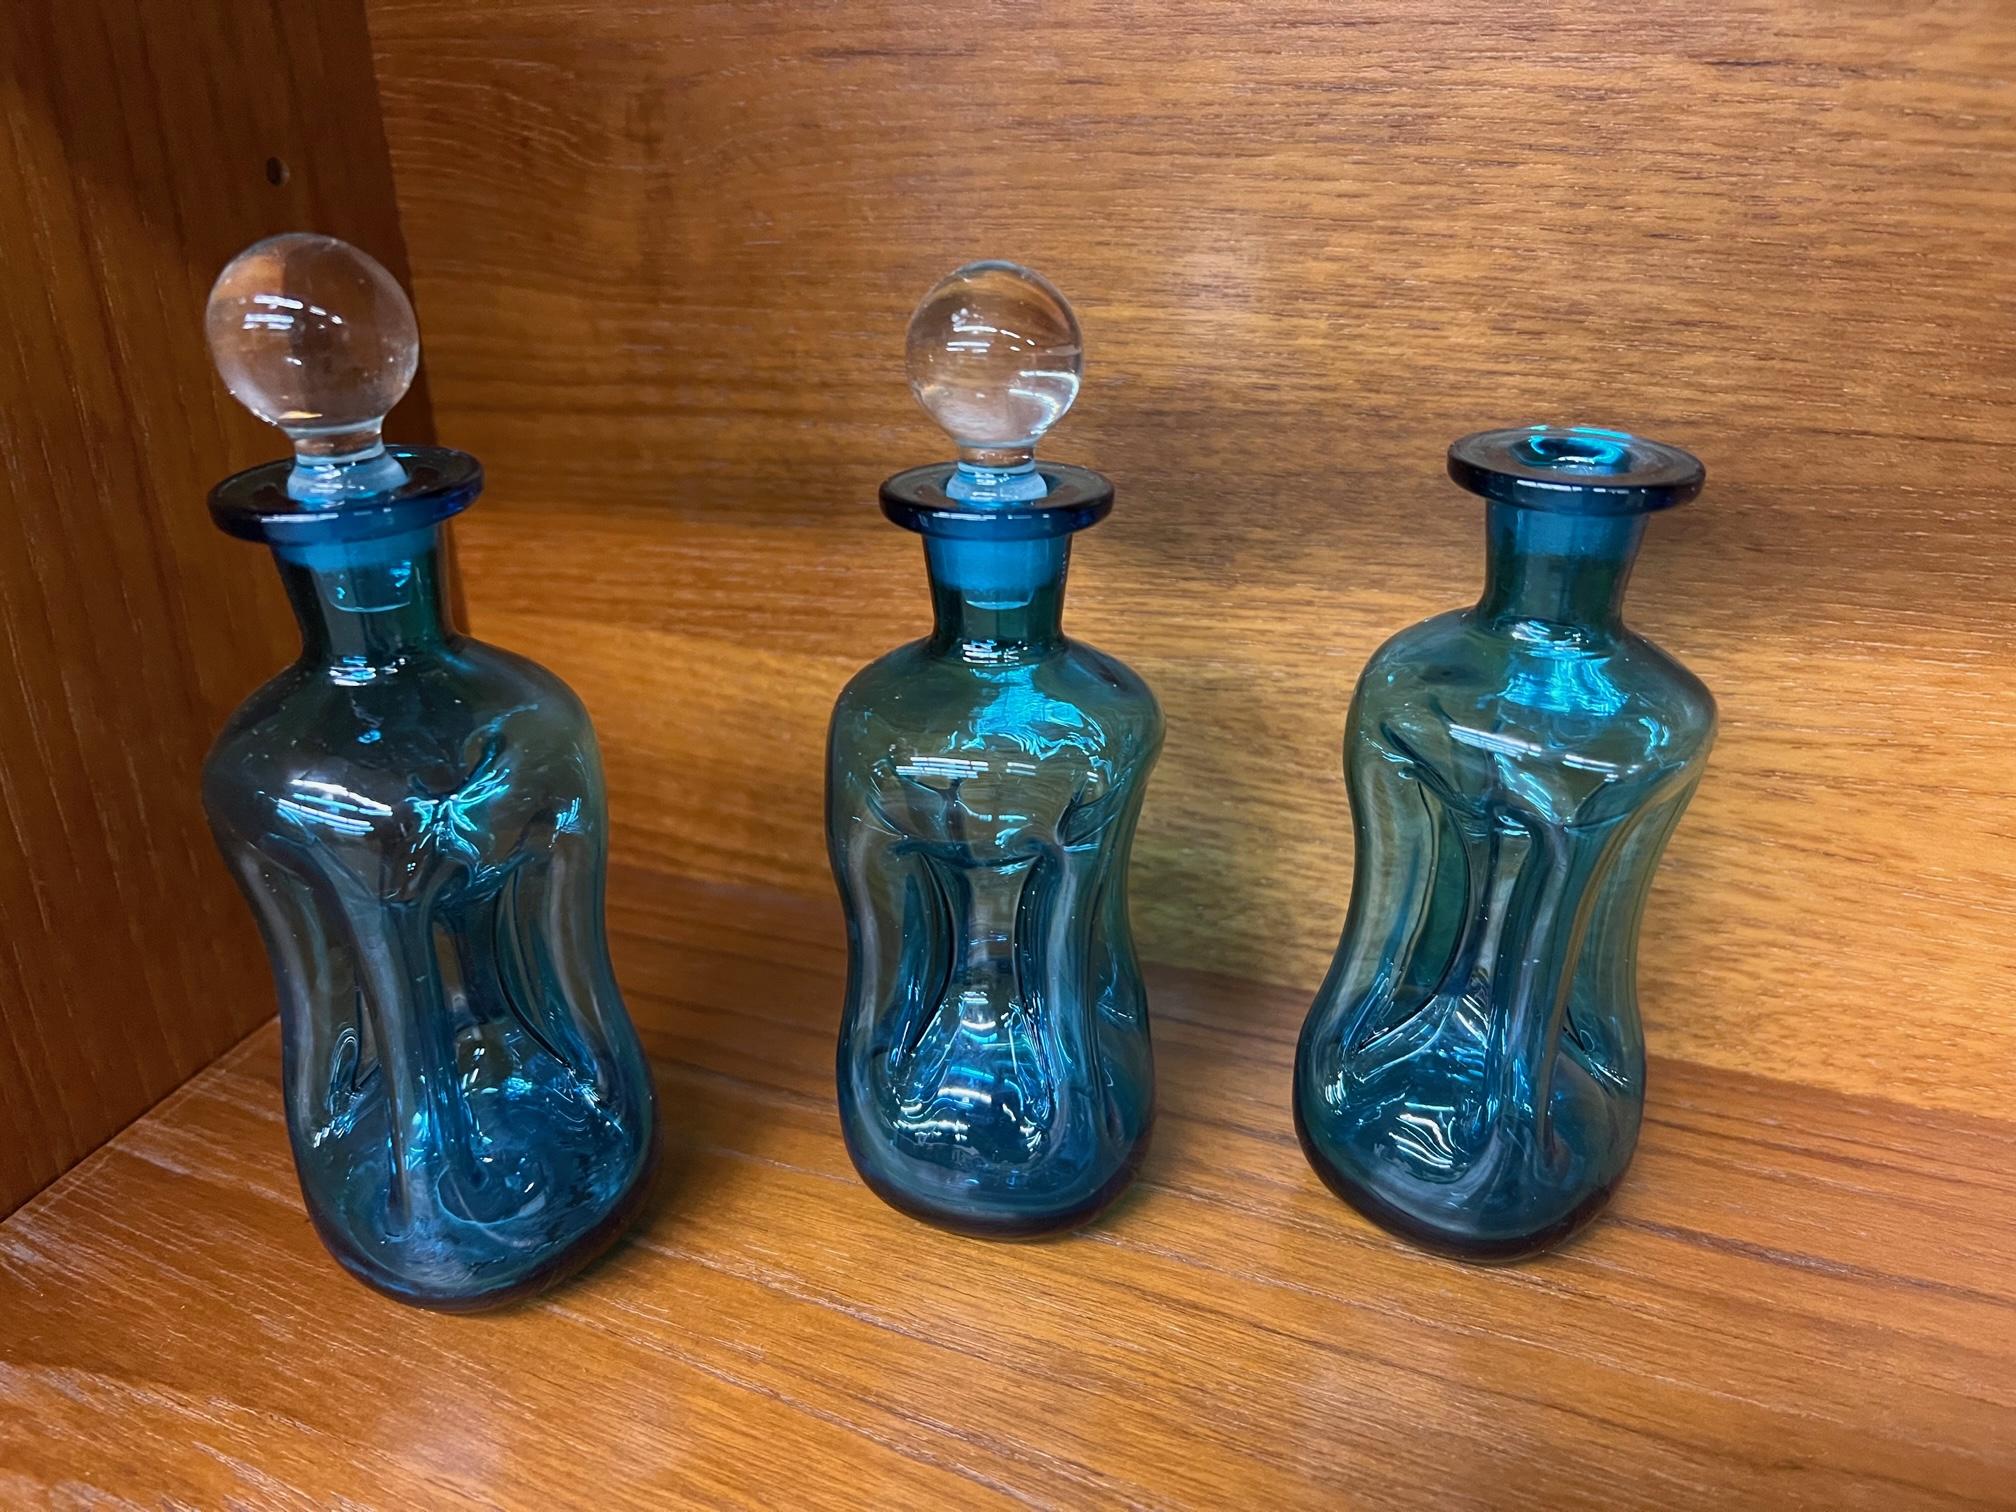 Set of 3 blue glass decanters by Holmegaard. Called Kluk Kluk decanters because of the sound they make when pouring into a cocktail glass. Two with stoppers, one without stopper.
Handblown glass with pinched sides, clear glass contrasting crown